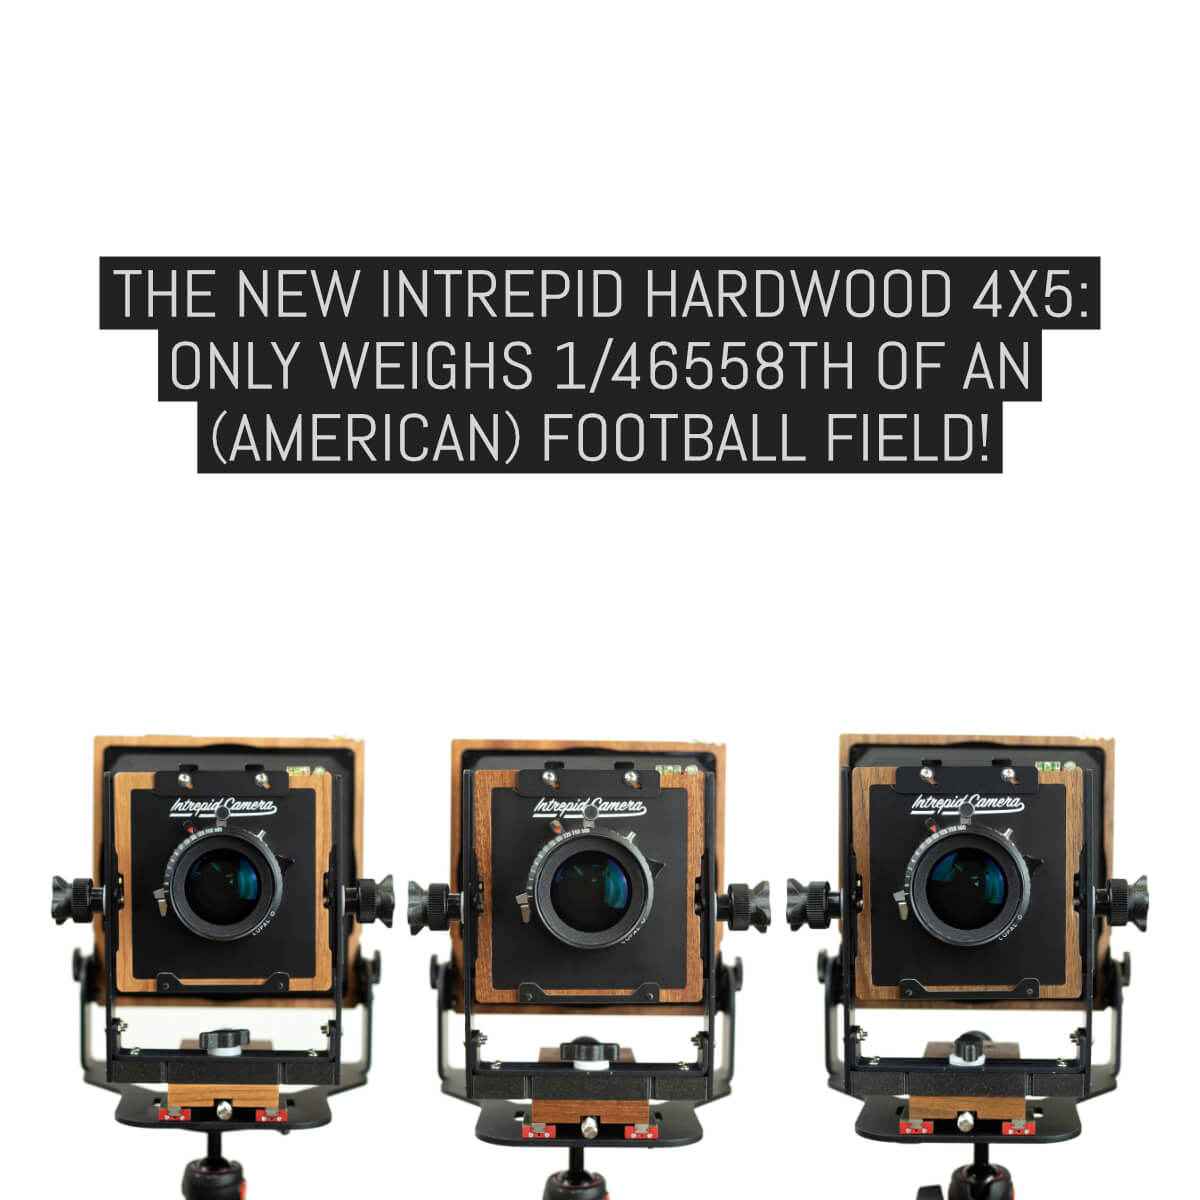 The new Intrepid Hardwood 4x5- Only weighs 1/46558th of an (American) football field!